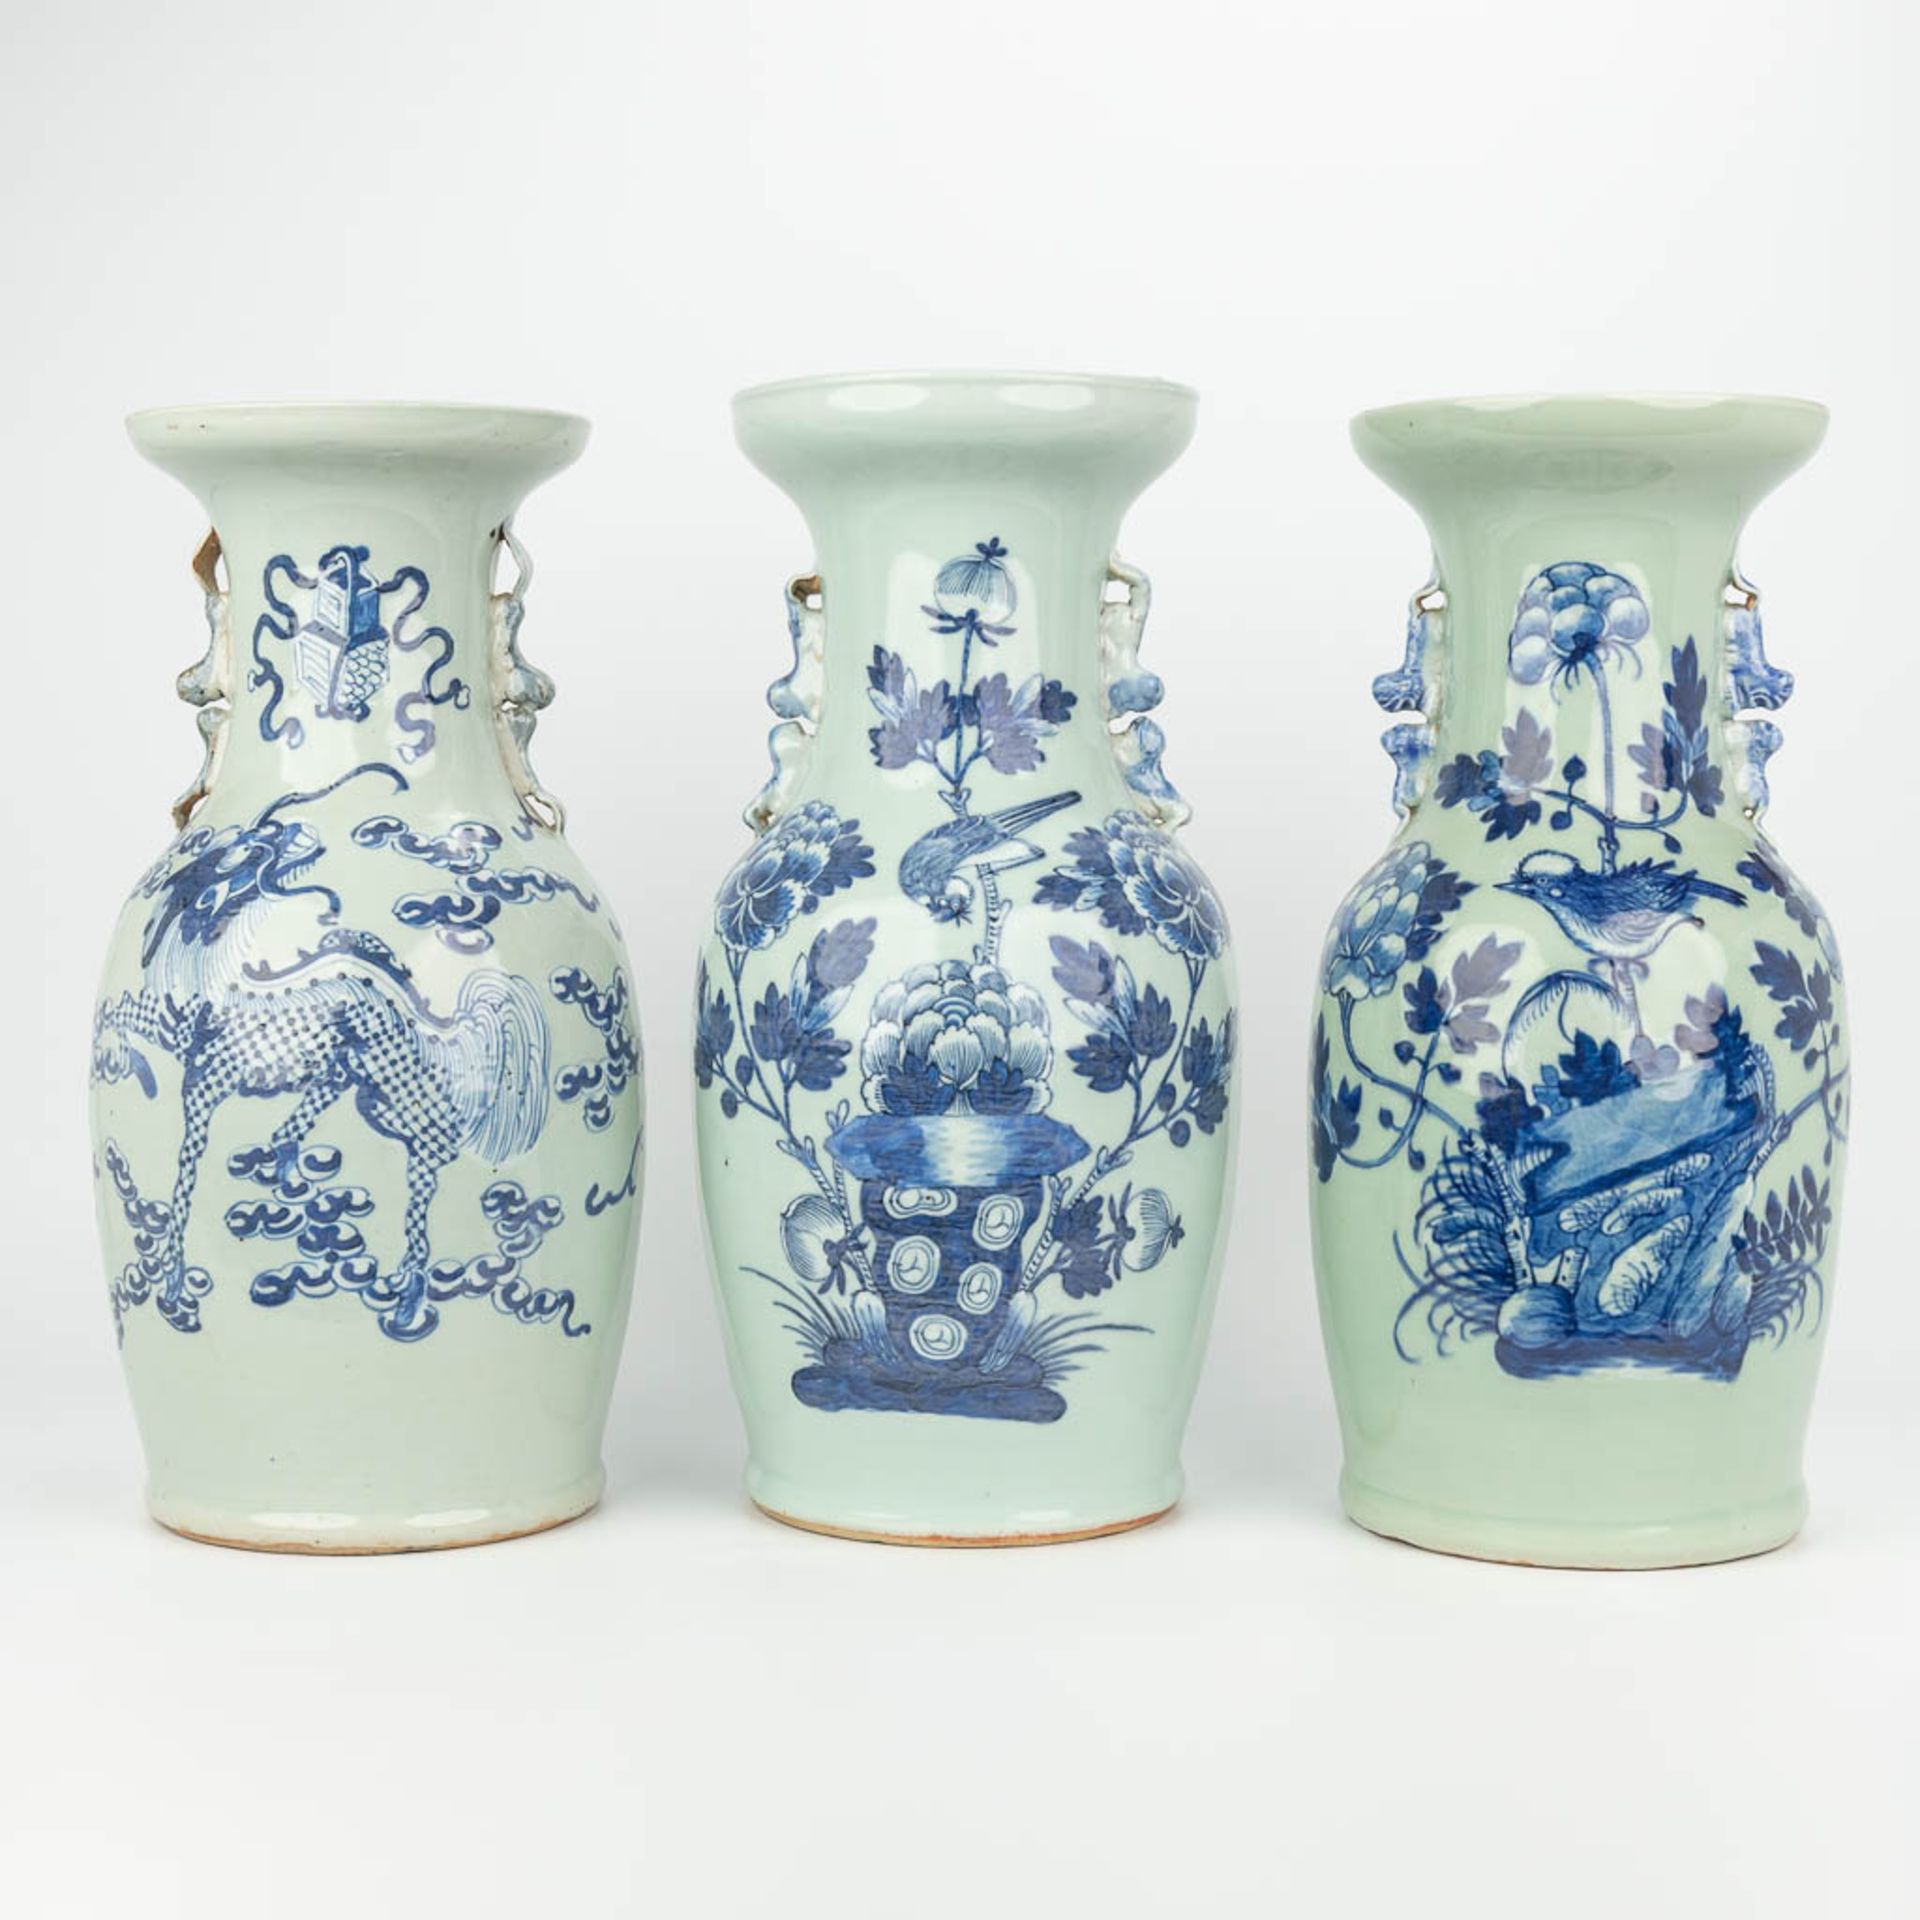 A collection of 3 vases made of Chinese porcelain with blue-white decor. (H:42cm)